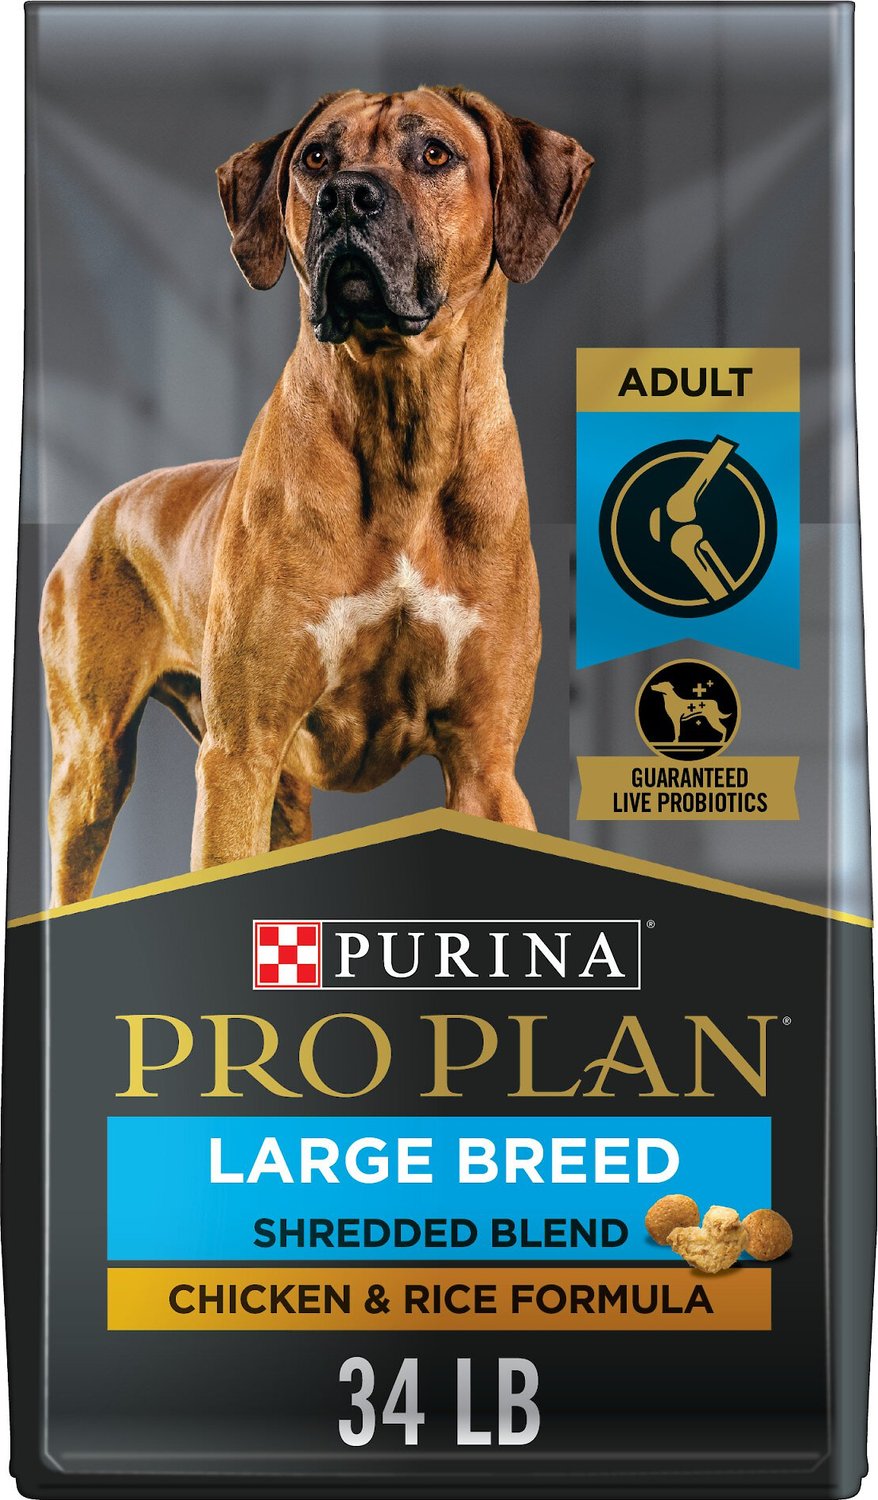 Purina Pro Plan Adult Large Breed Blend Pollo & Riso Formula